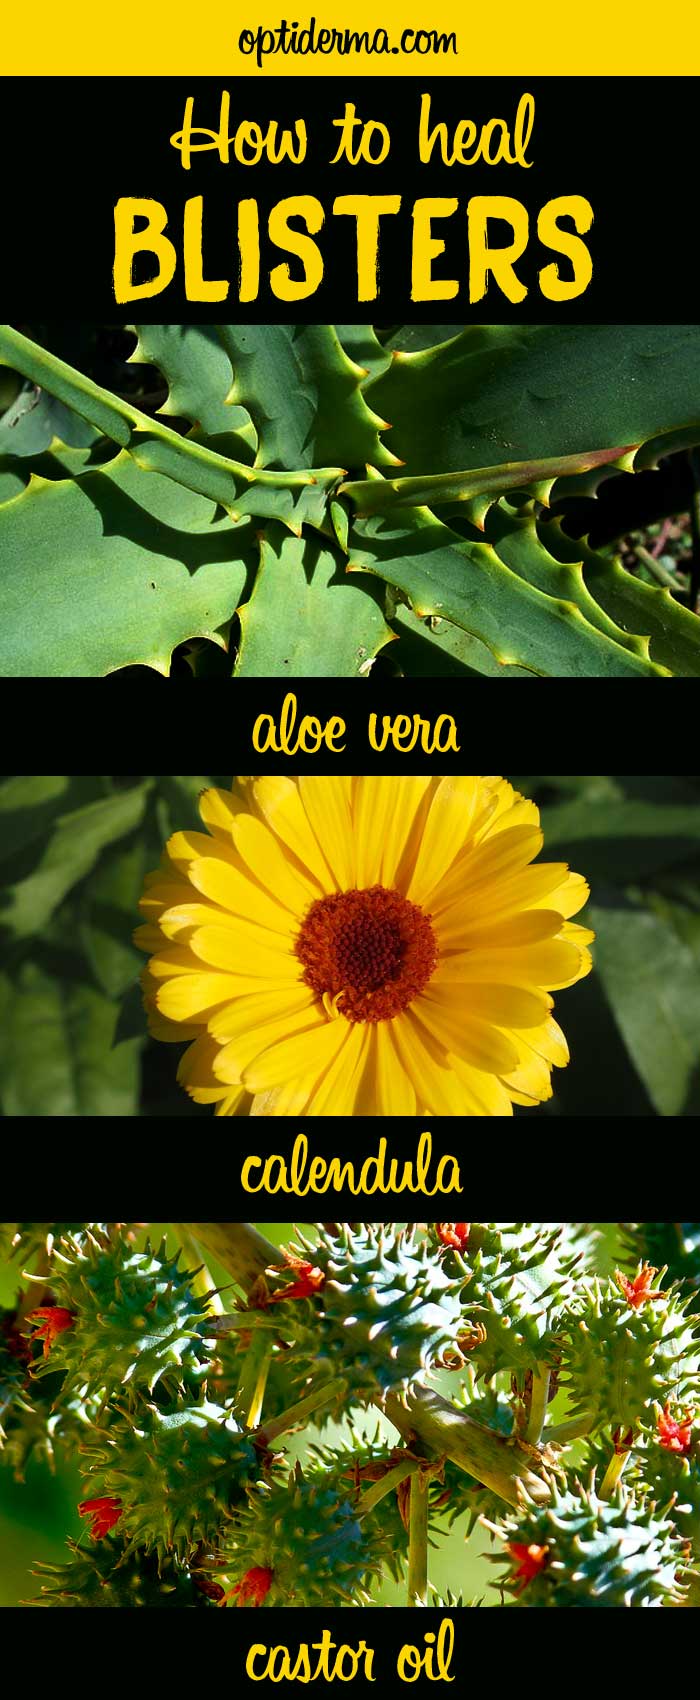 How to Heal Blisters with Calendula, Aloe Vera or Castor Oil